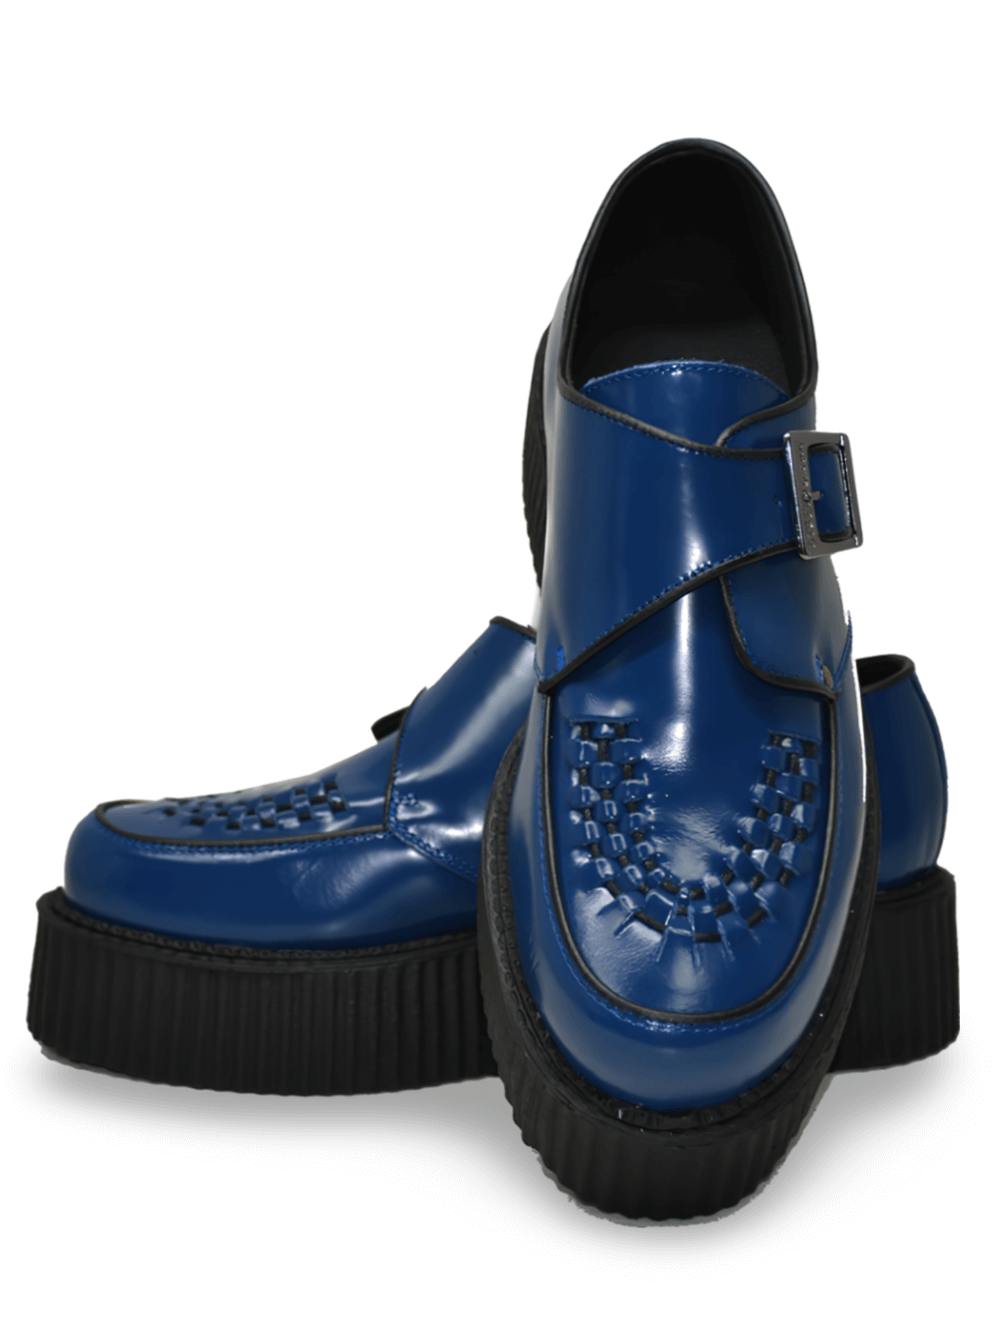 Round Toe Leather Creepers with Buckle and Double Sole